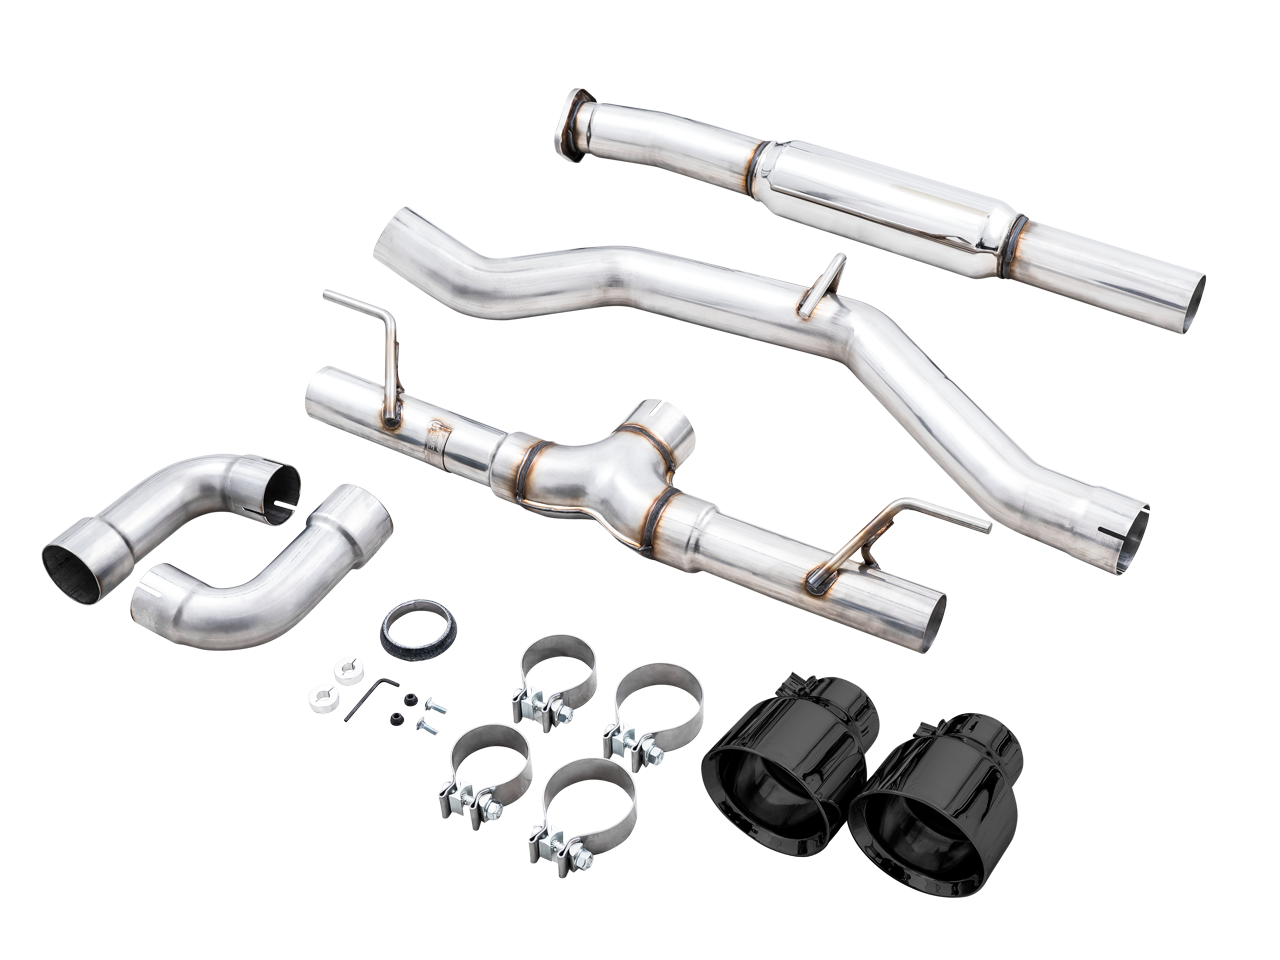 AWE EXHAUST GR86/BRZ Rumble v2.4